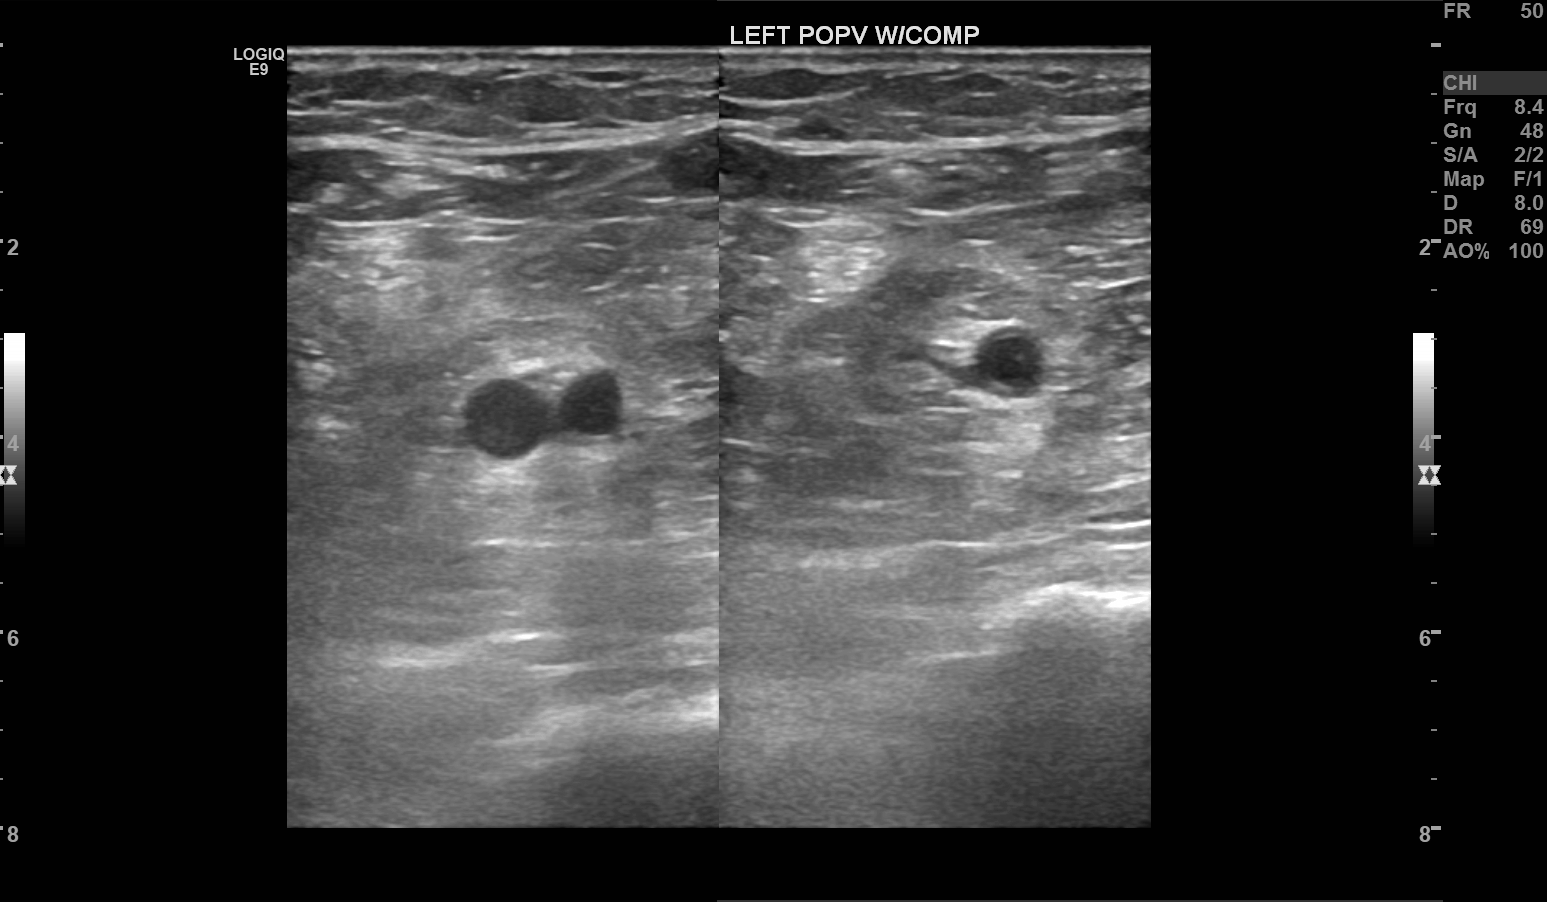 B-Mode doppler showing the left popliteal vein under compression. This compressibility is a normal finding.